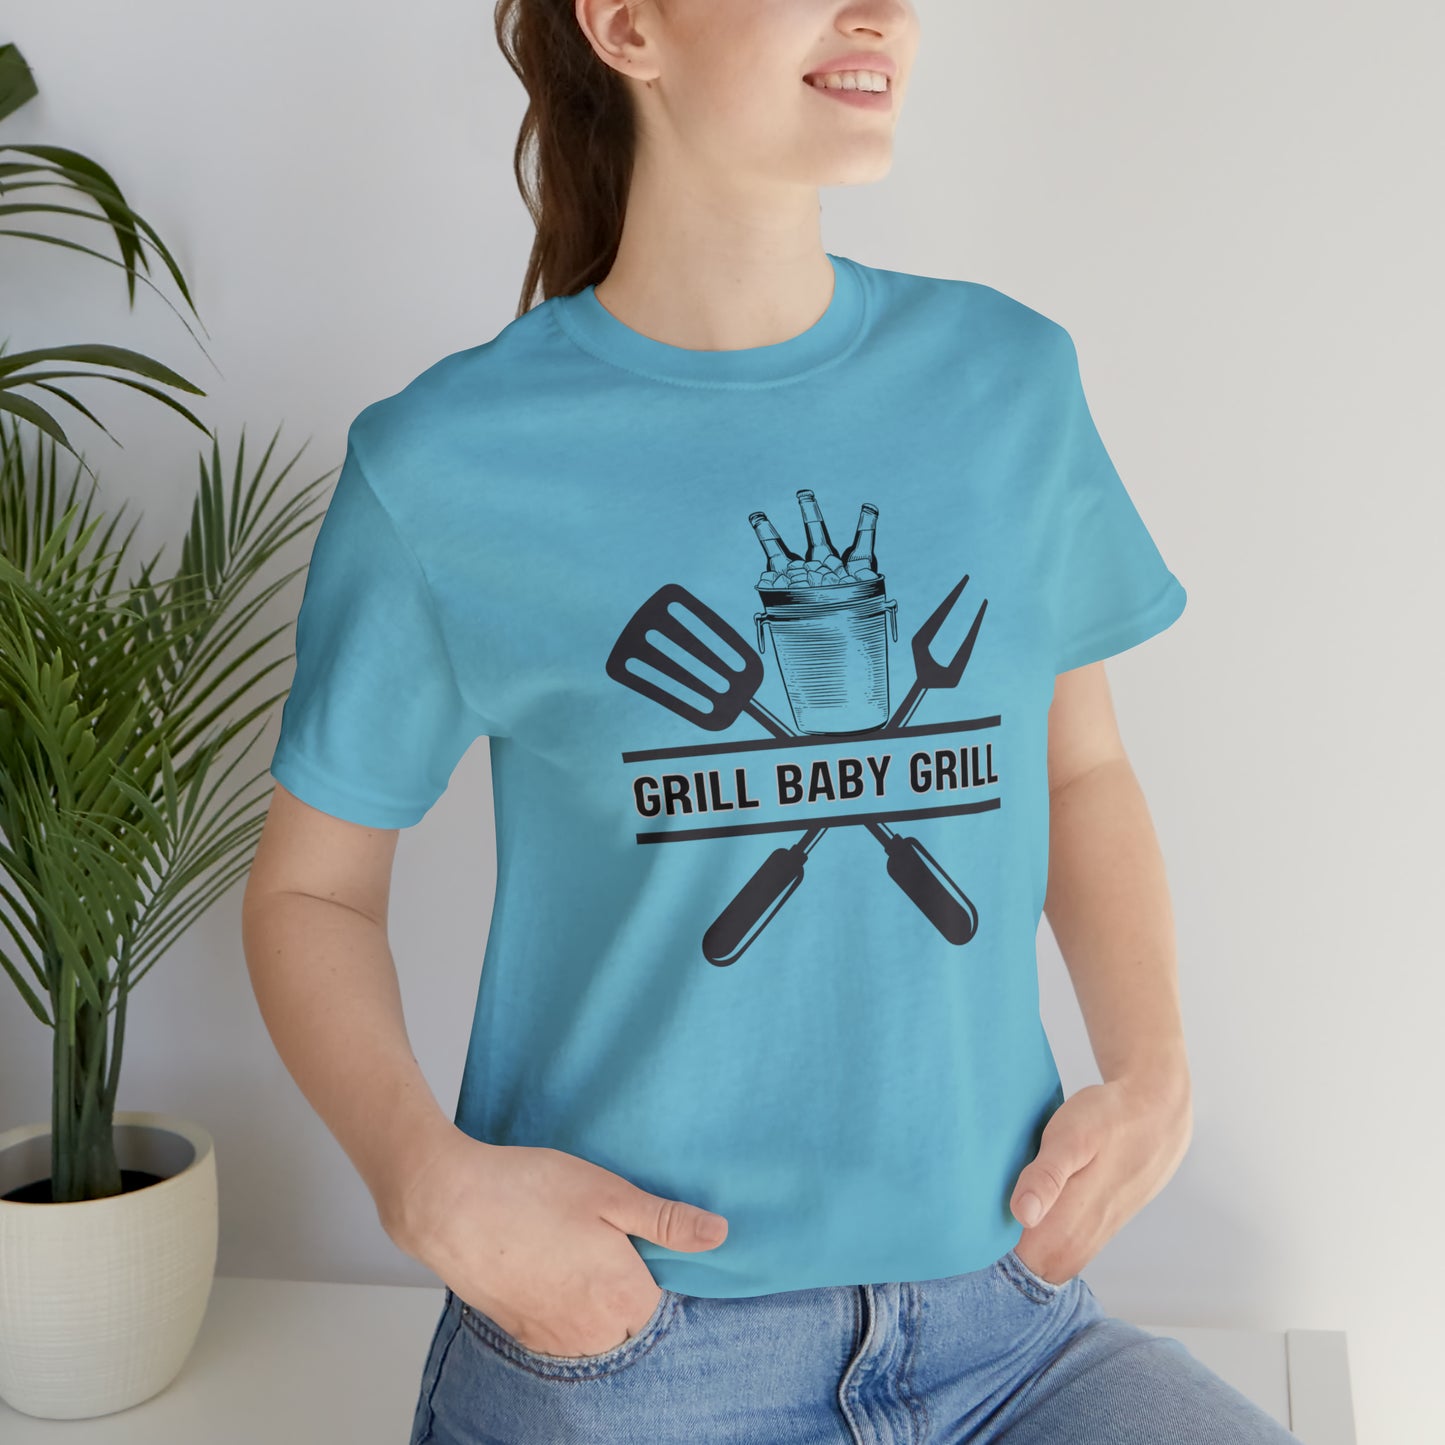 Hobby, Interest, Grilling, Grill Baby Grill, Family, Dad, Mom- Adult, Regular Fit, Soft Cotton, T-shirt